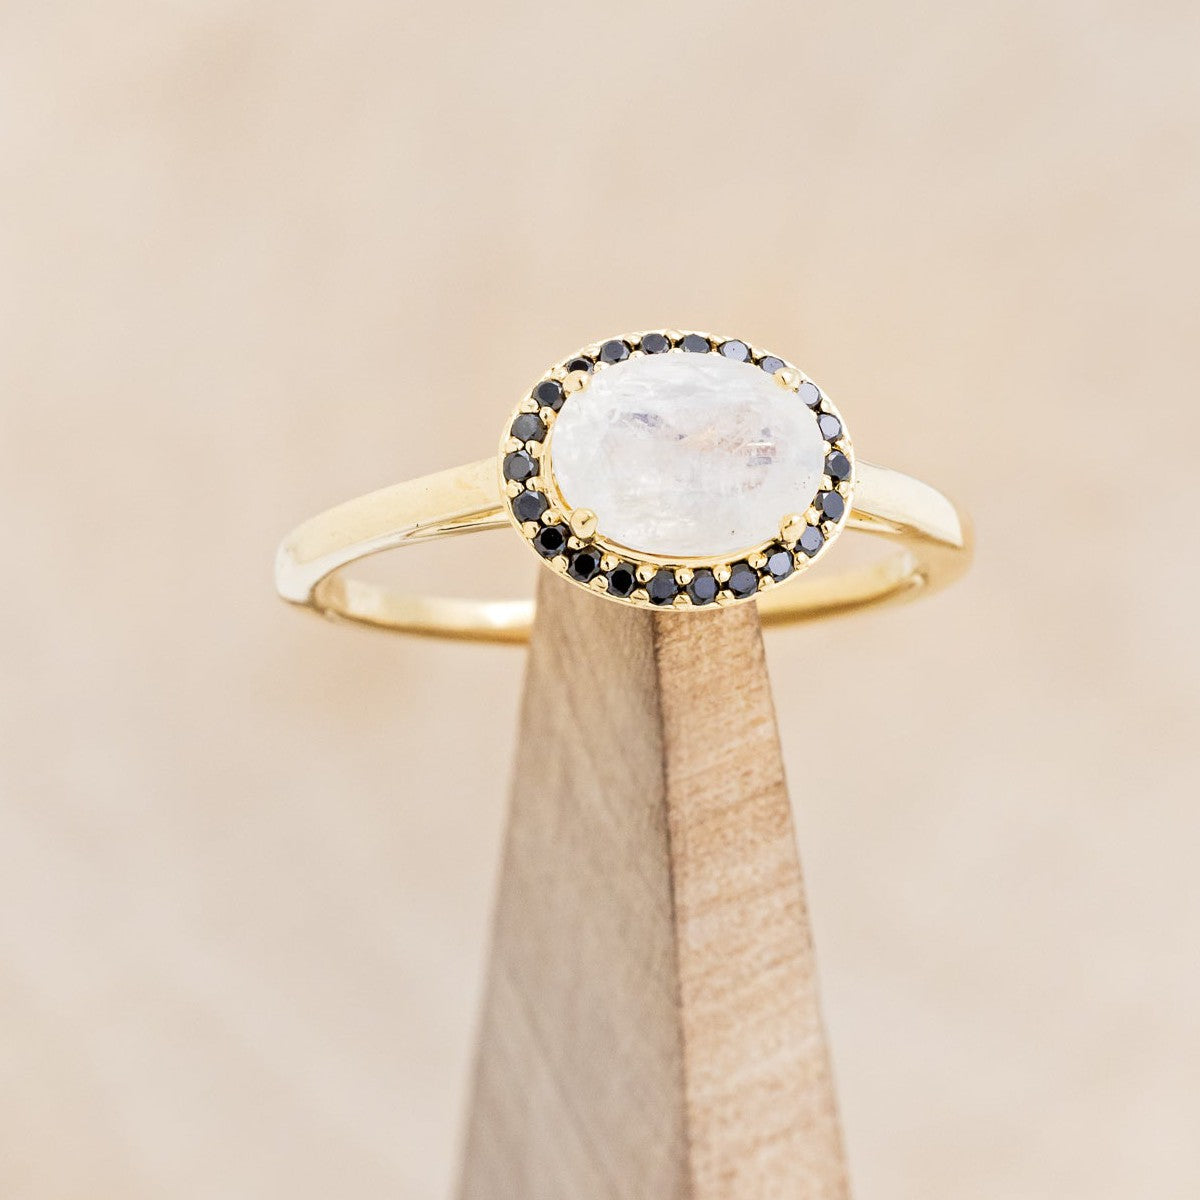 Female 99% 925 Sterling Silver Rainbow Moonstone Ring, Weight: 3.8 Gm, 8 Us  at Rs 552.41/piece in Jaipur